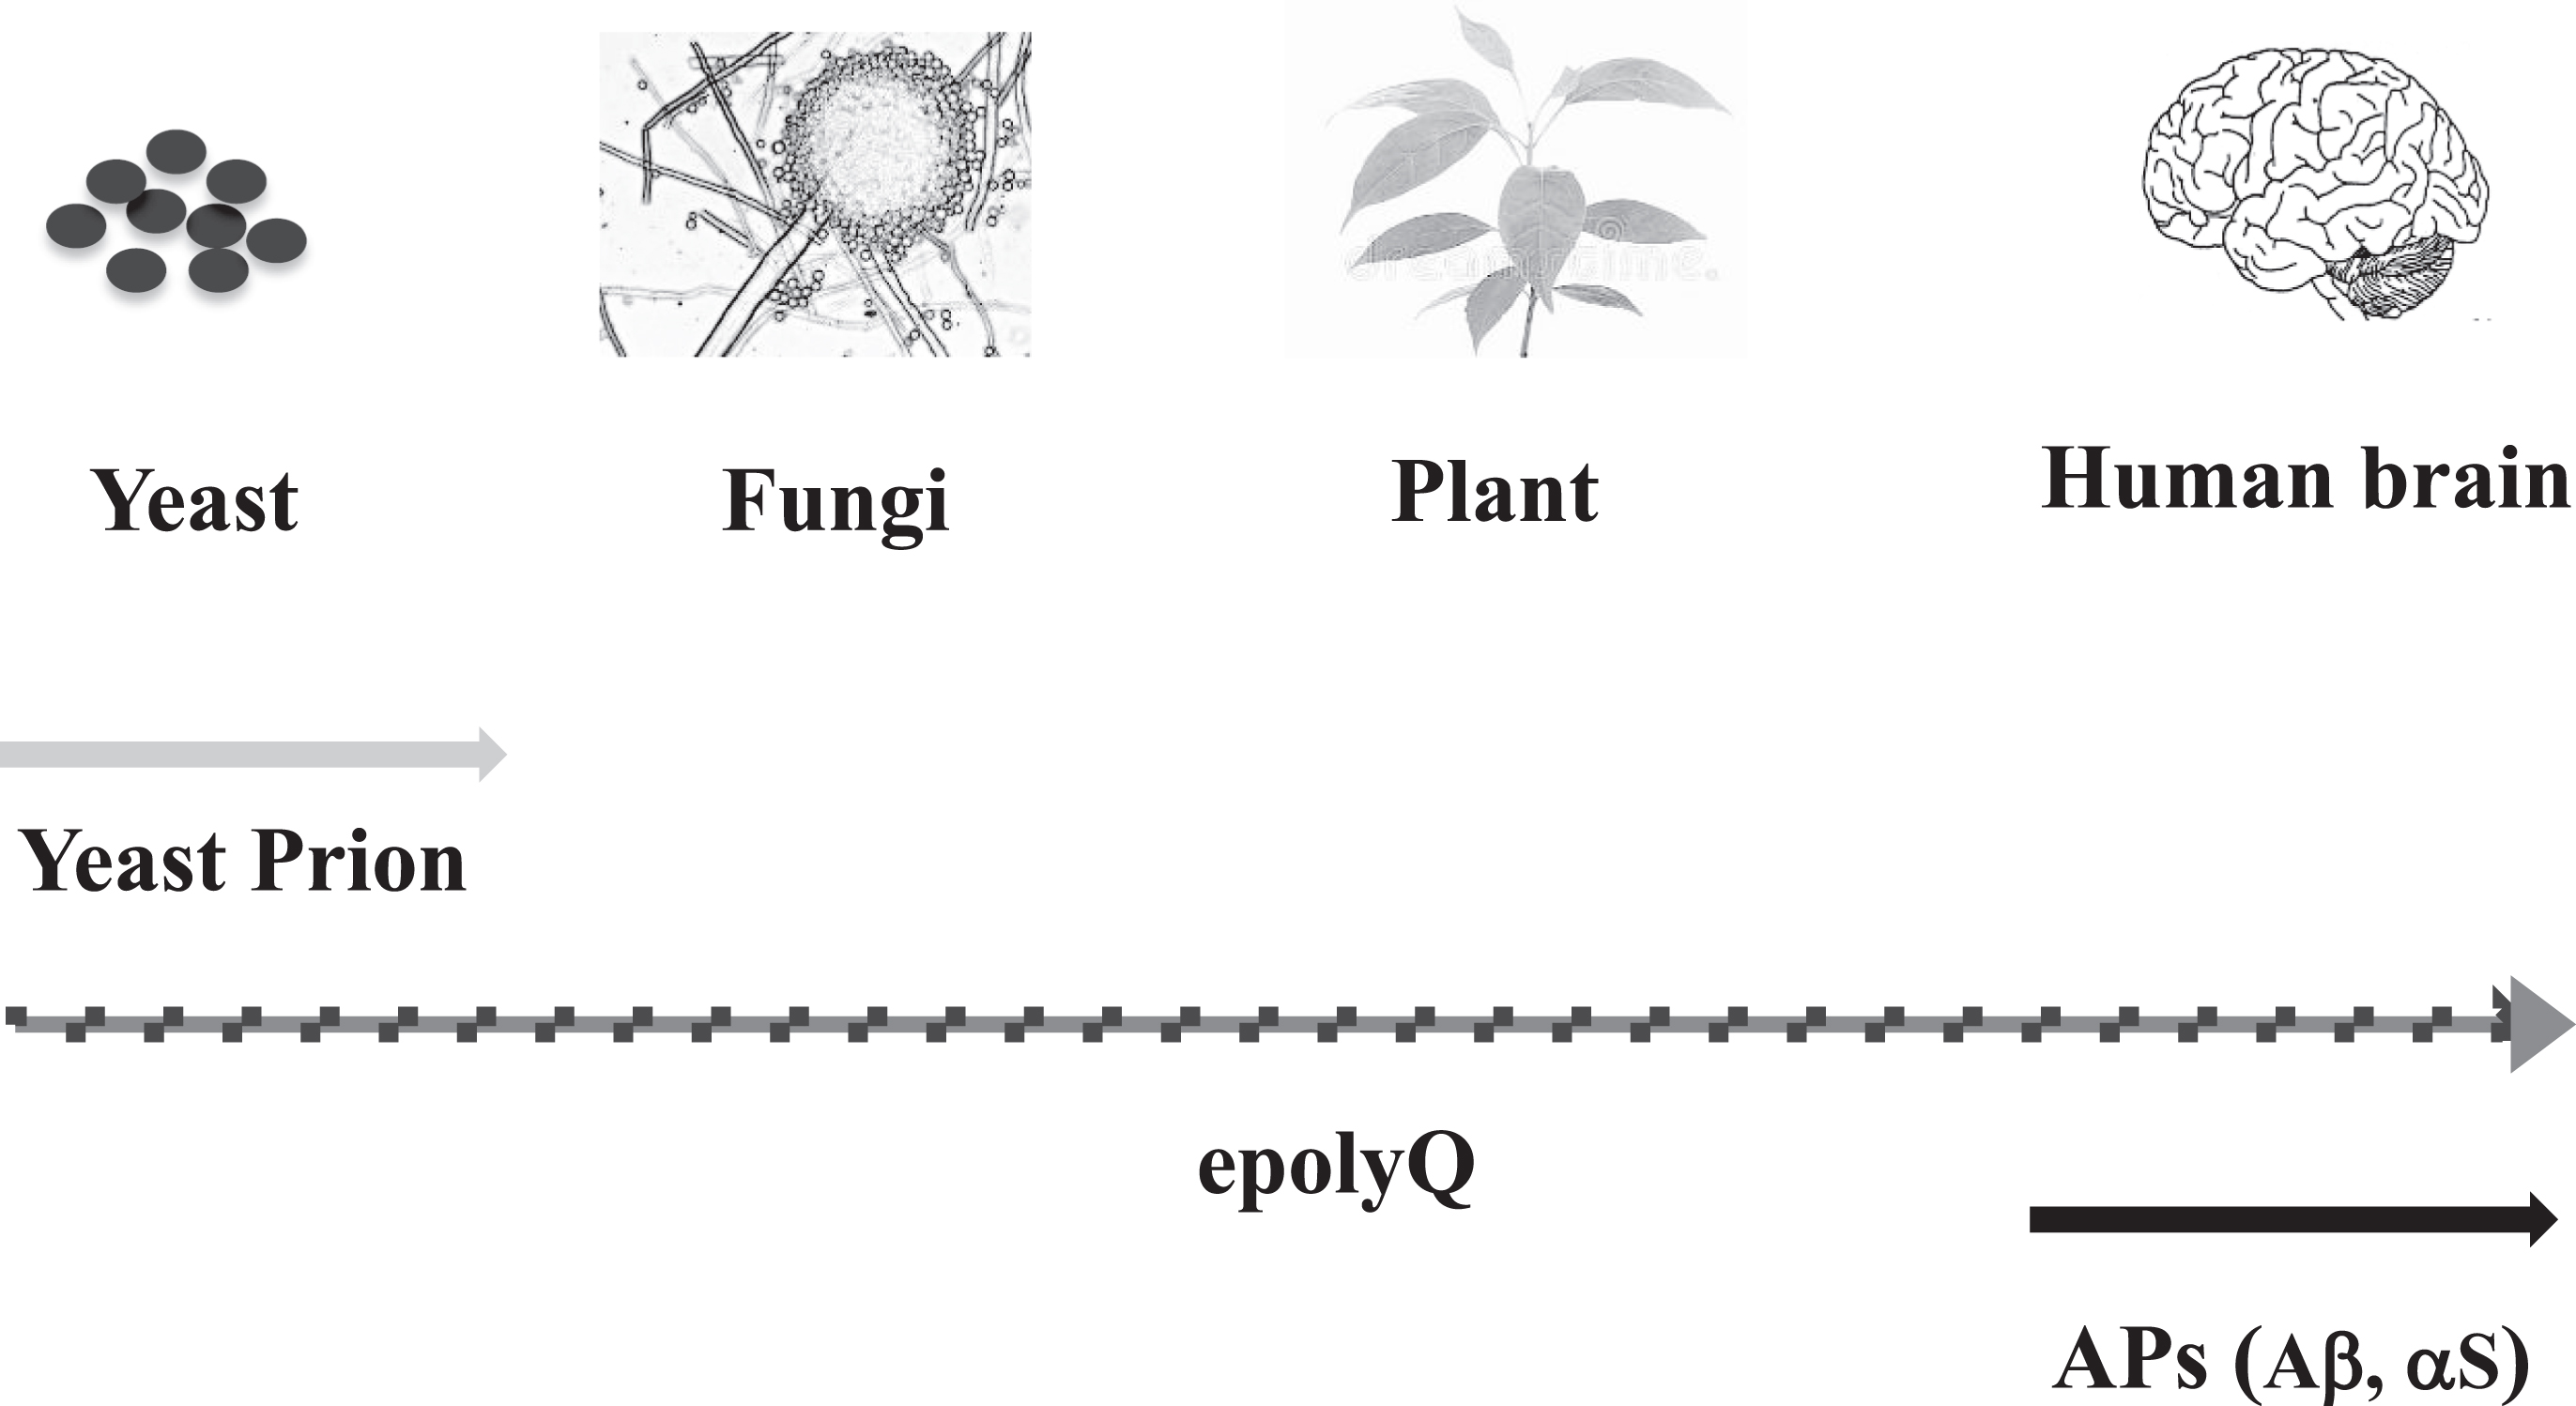 Evolution of amyloid-related evolvability. Synthesis of yeast prion is observed in microorganisms such as yeast, whereas expression of APs, including Aβ and αS, has not been observed in invertebrates, suggesting that APs are vertebrate-specific proteins. Notably, polyQ-containing proteins are ubiquitously expressed from microorganisms, such as yeast and fungi, to animals and plants. Thus, epolyQ might be regarded as an evolution of amyloid-related evolvability between yeast prion and APs.